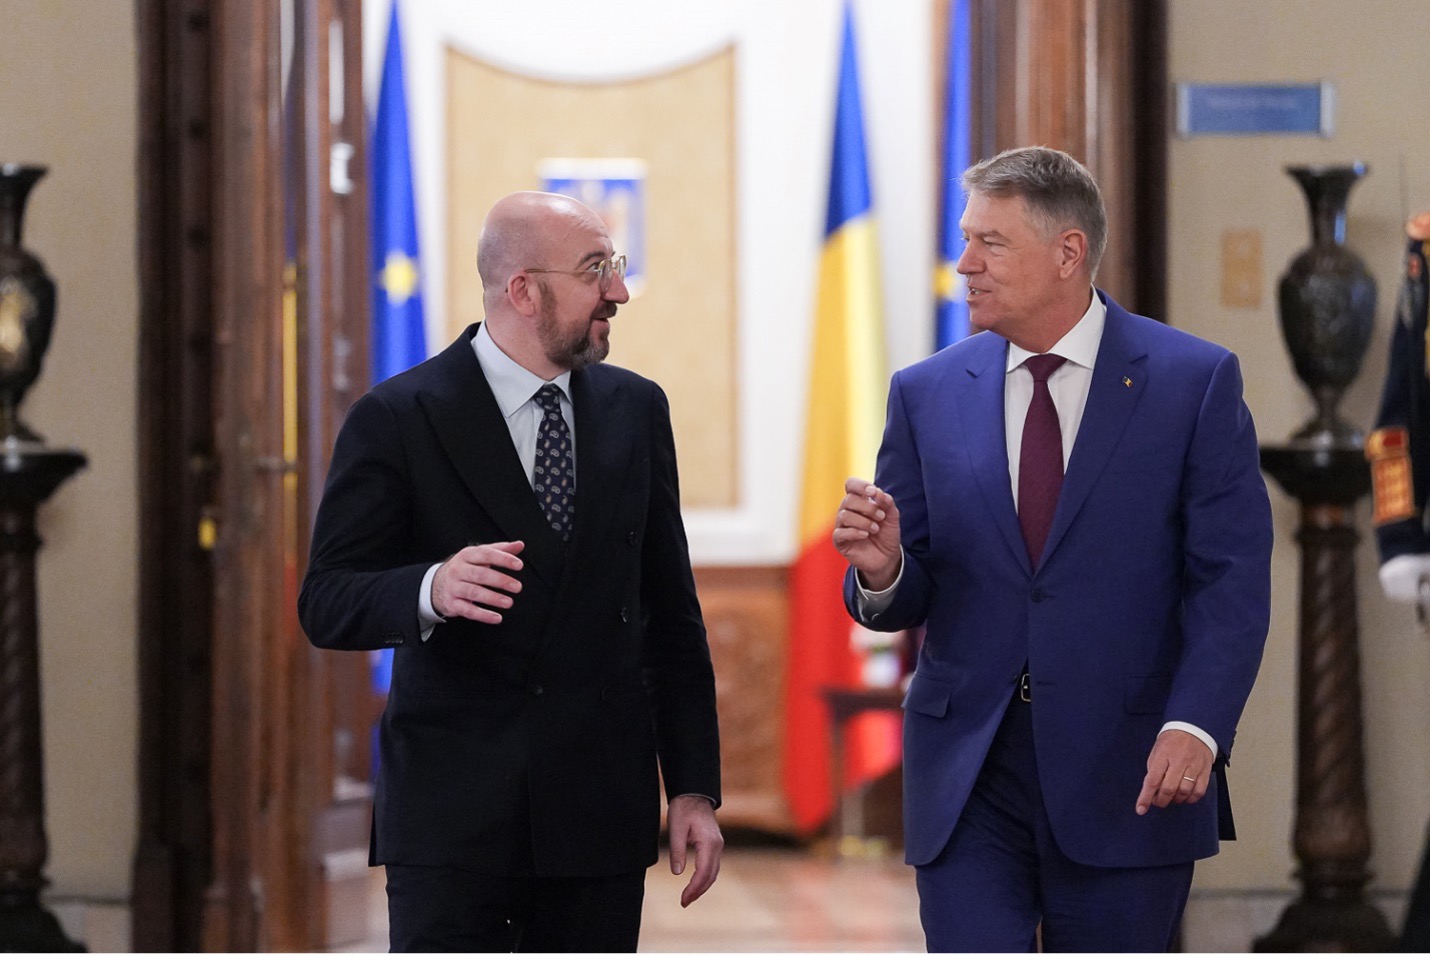 Romanian President Klaus Iohannis and Charles Michel, President of the European Council